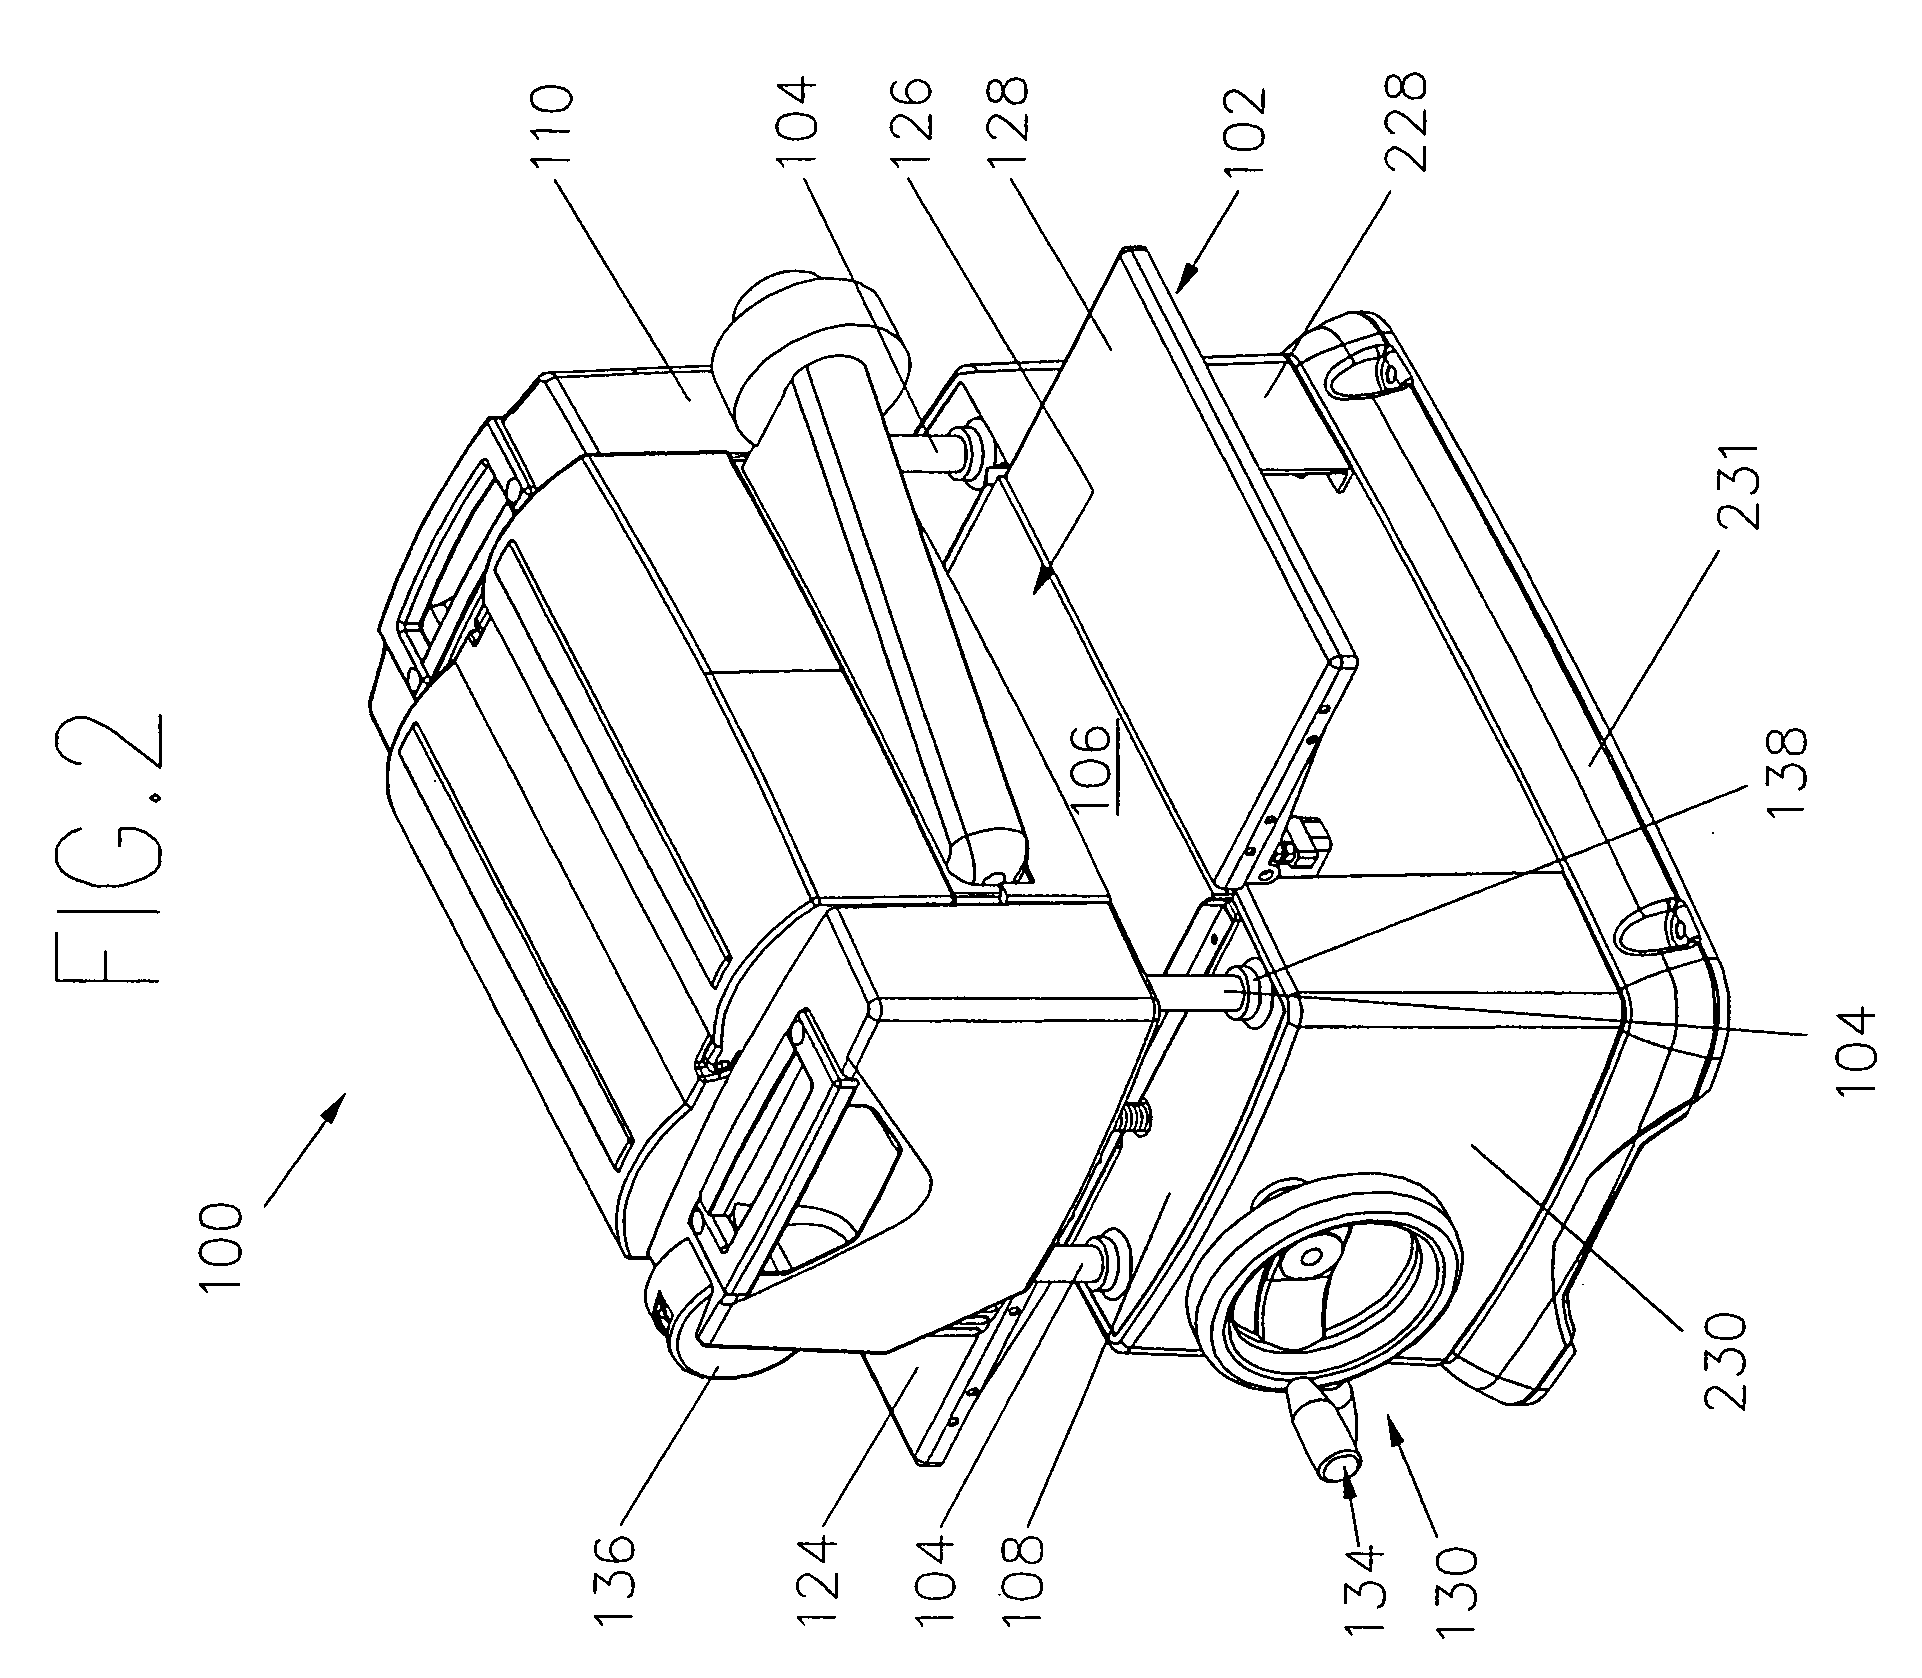 Planer with carriage locking mechanism